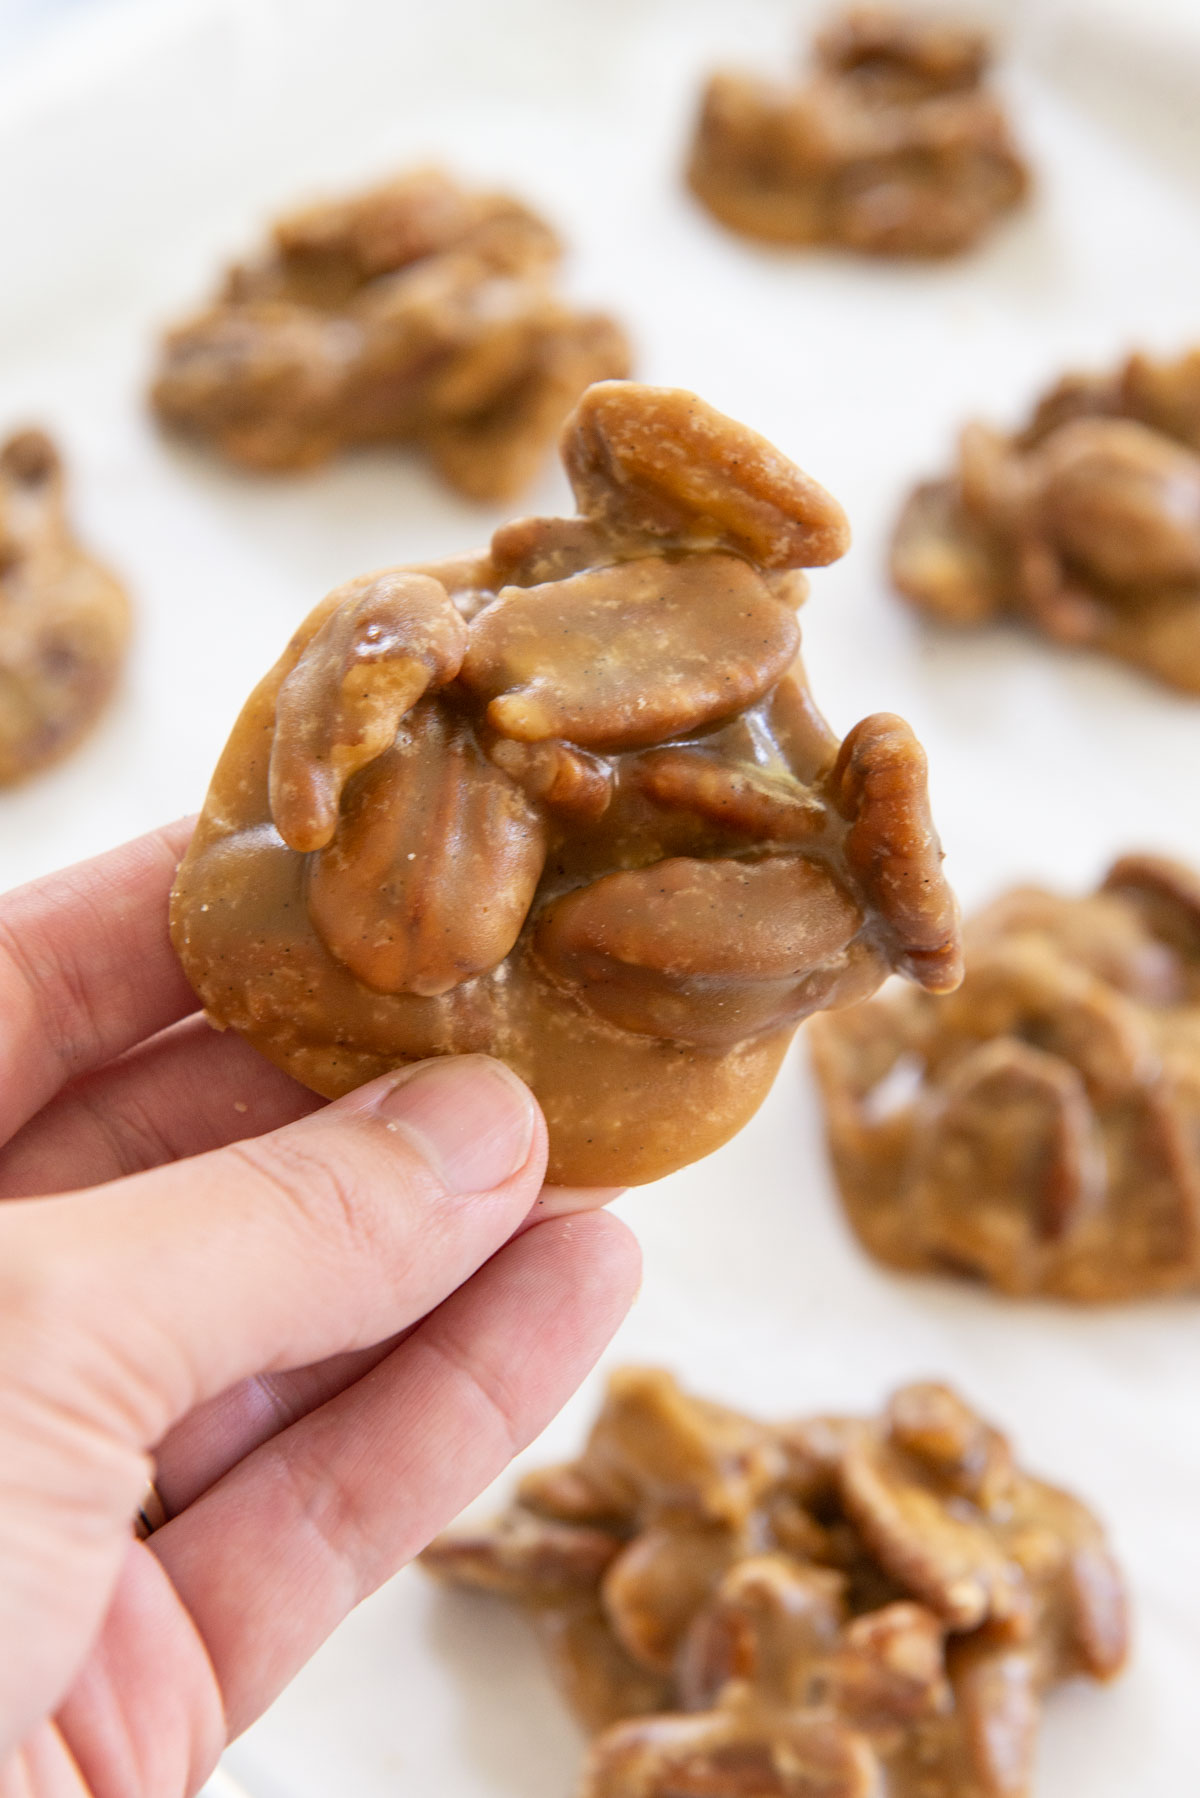 Pecan Praline Candy held In Hand Over Parchment Paper